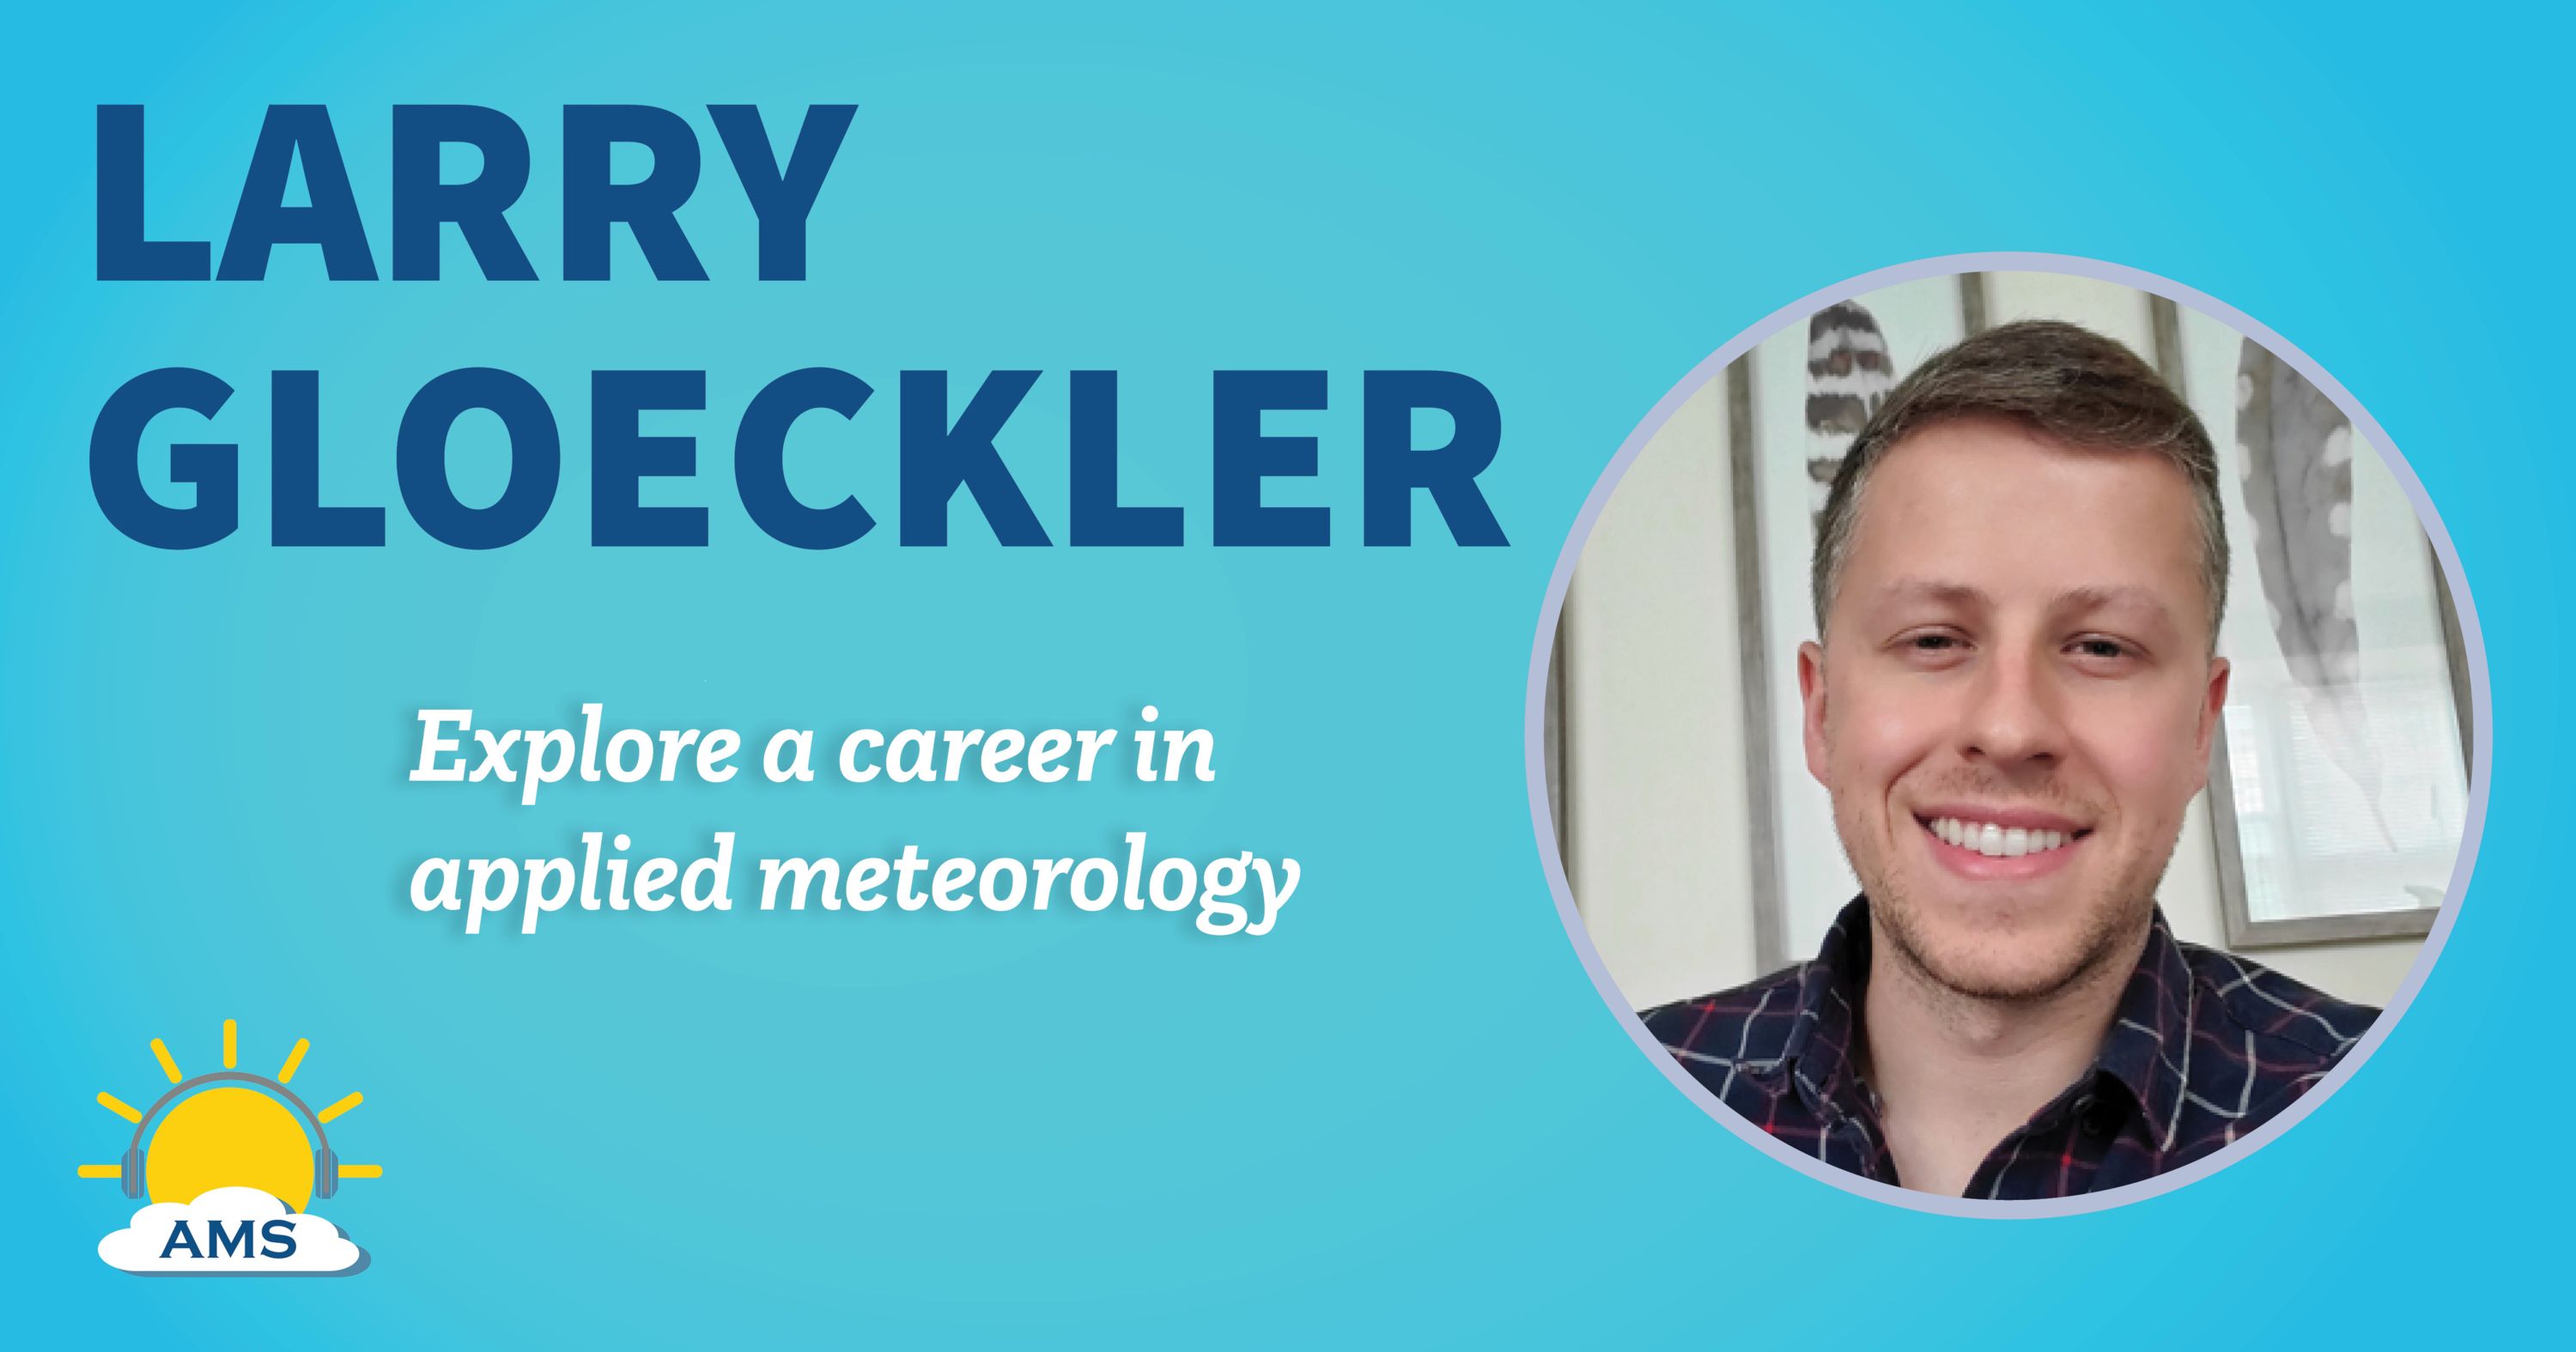 Larry Gloeckler headshot graphic with teaser text that reads "explore a career in applied meteorology"